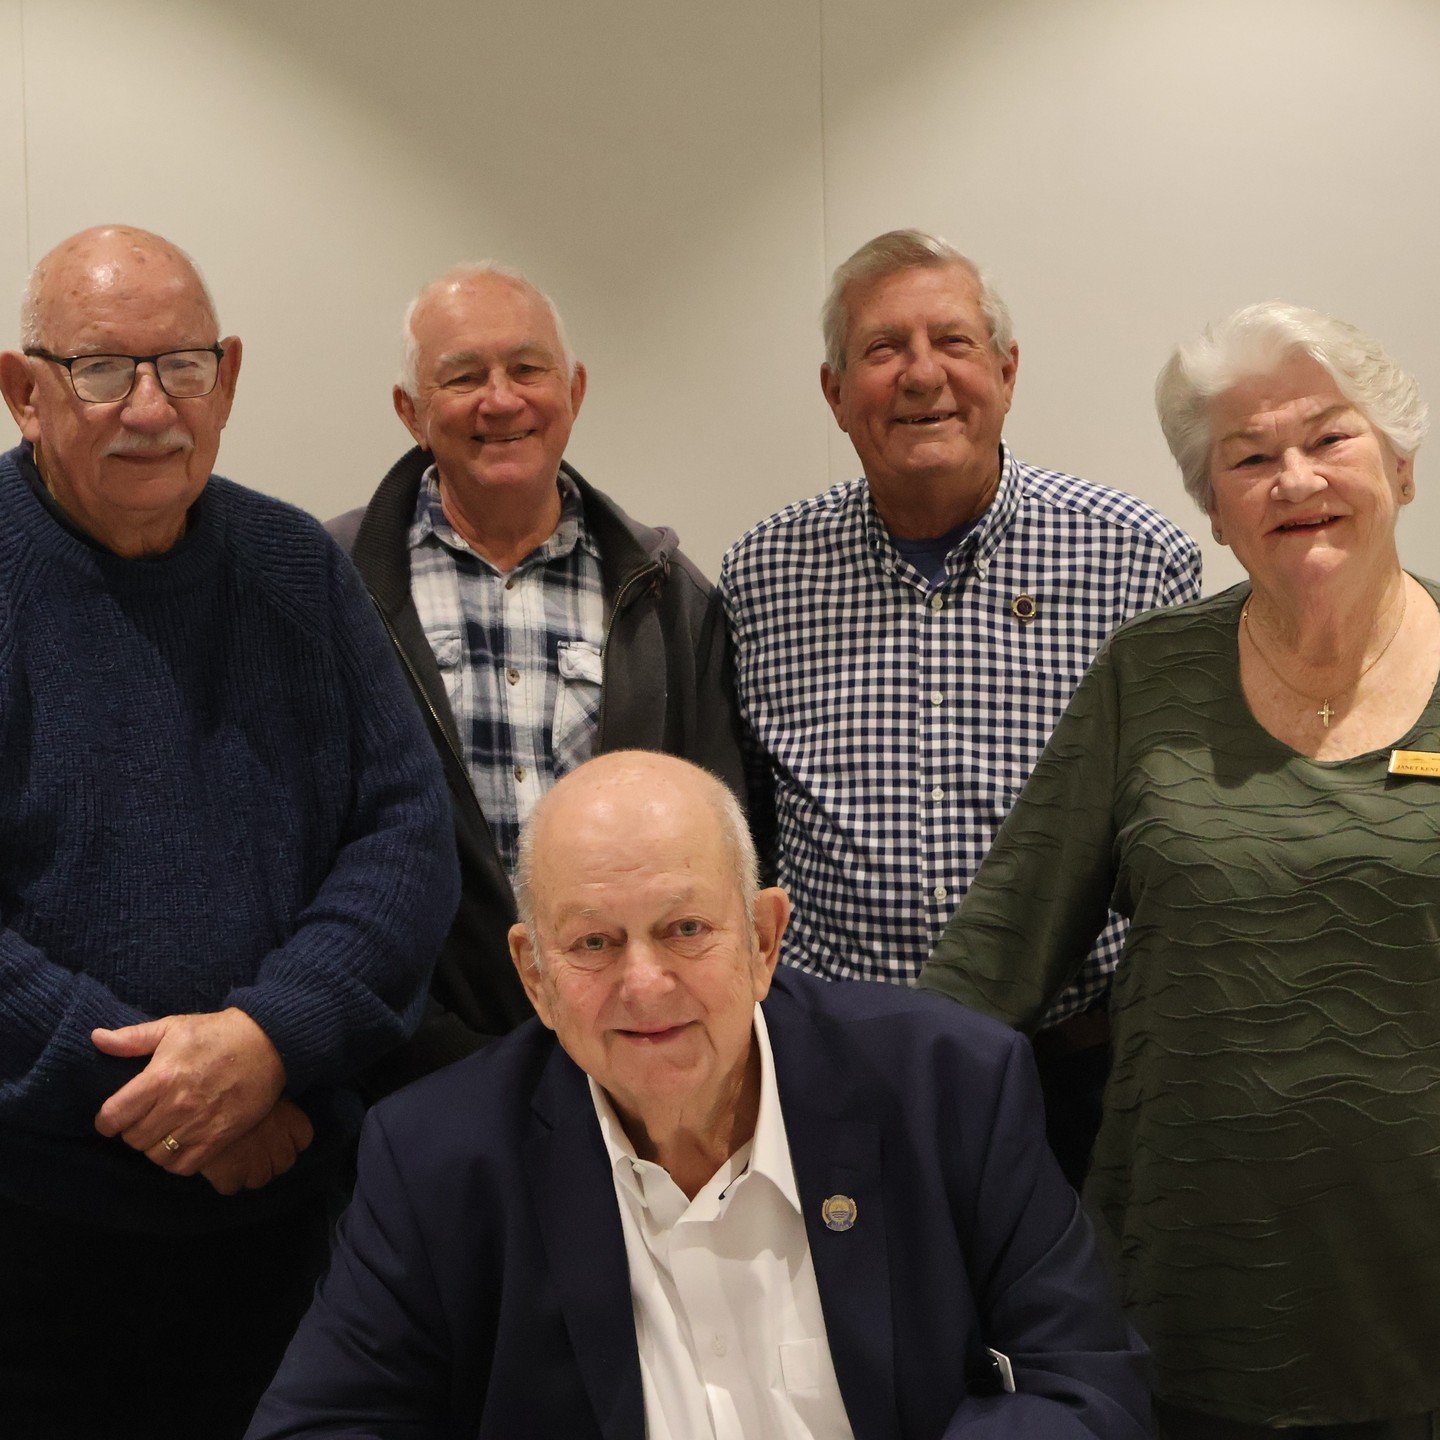 We are pleased to welcome John Brown as the newest Life Member of Cronulla RSL. John's dedication to our community has been outstanding, and this recognition is well-deserved. Please join us in congratulating him on this significant achievement. We l